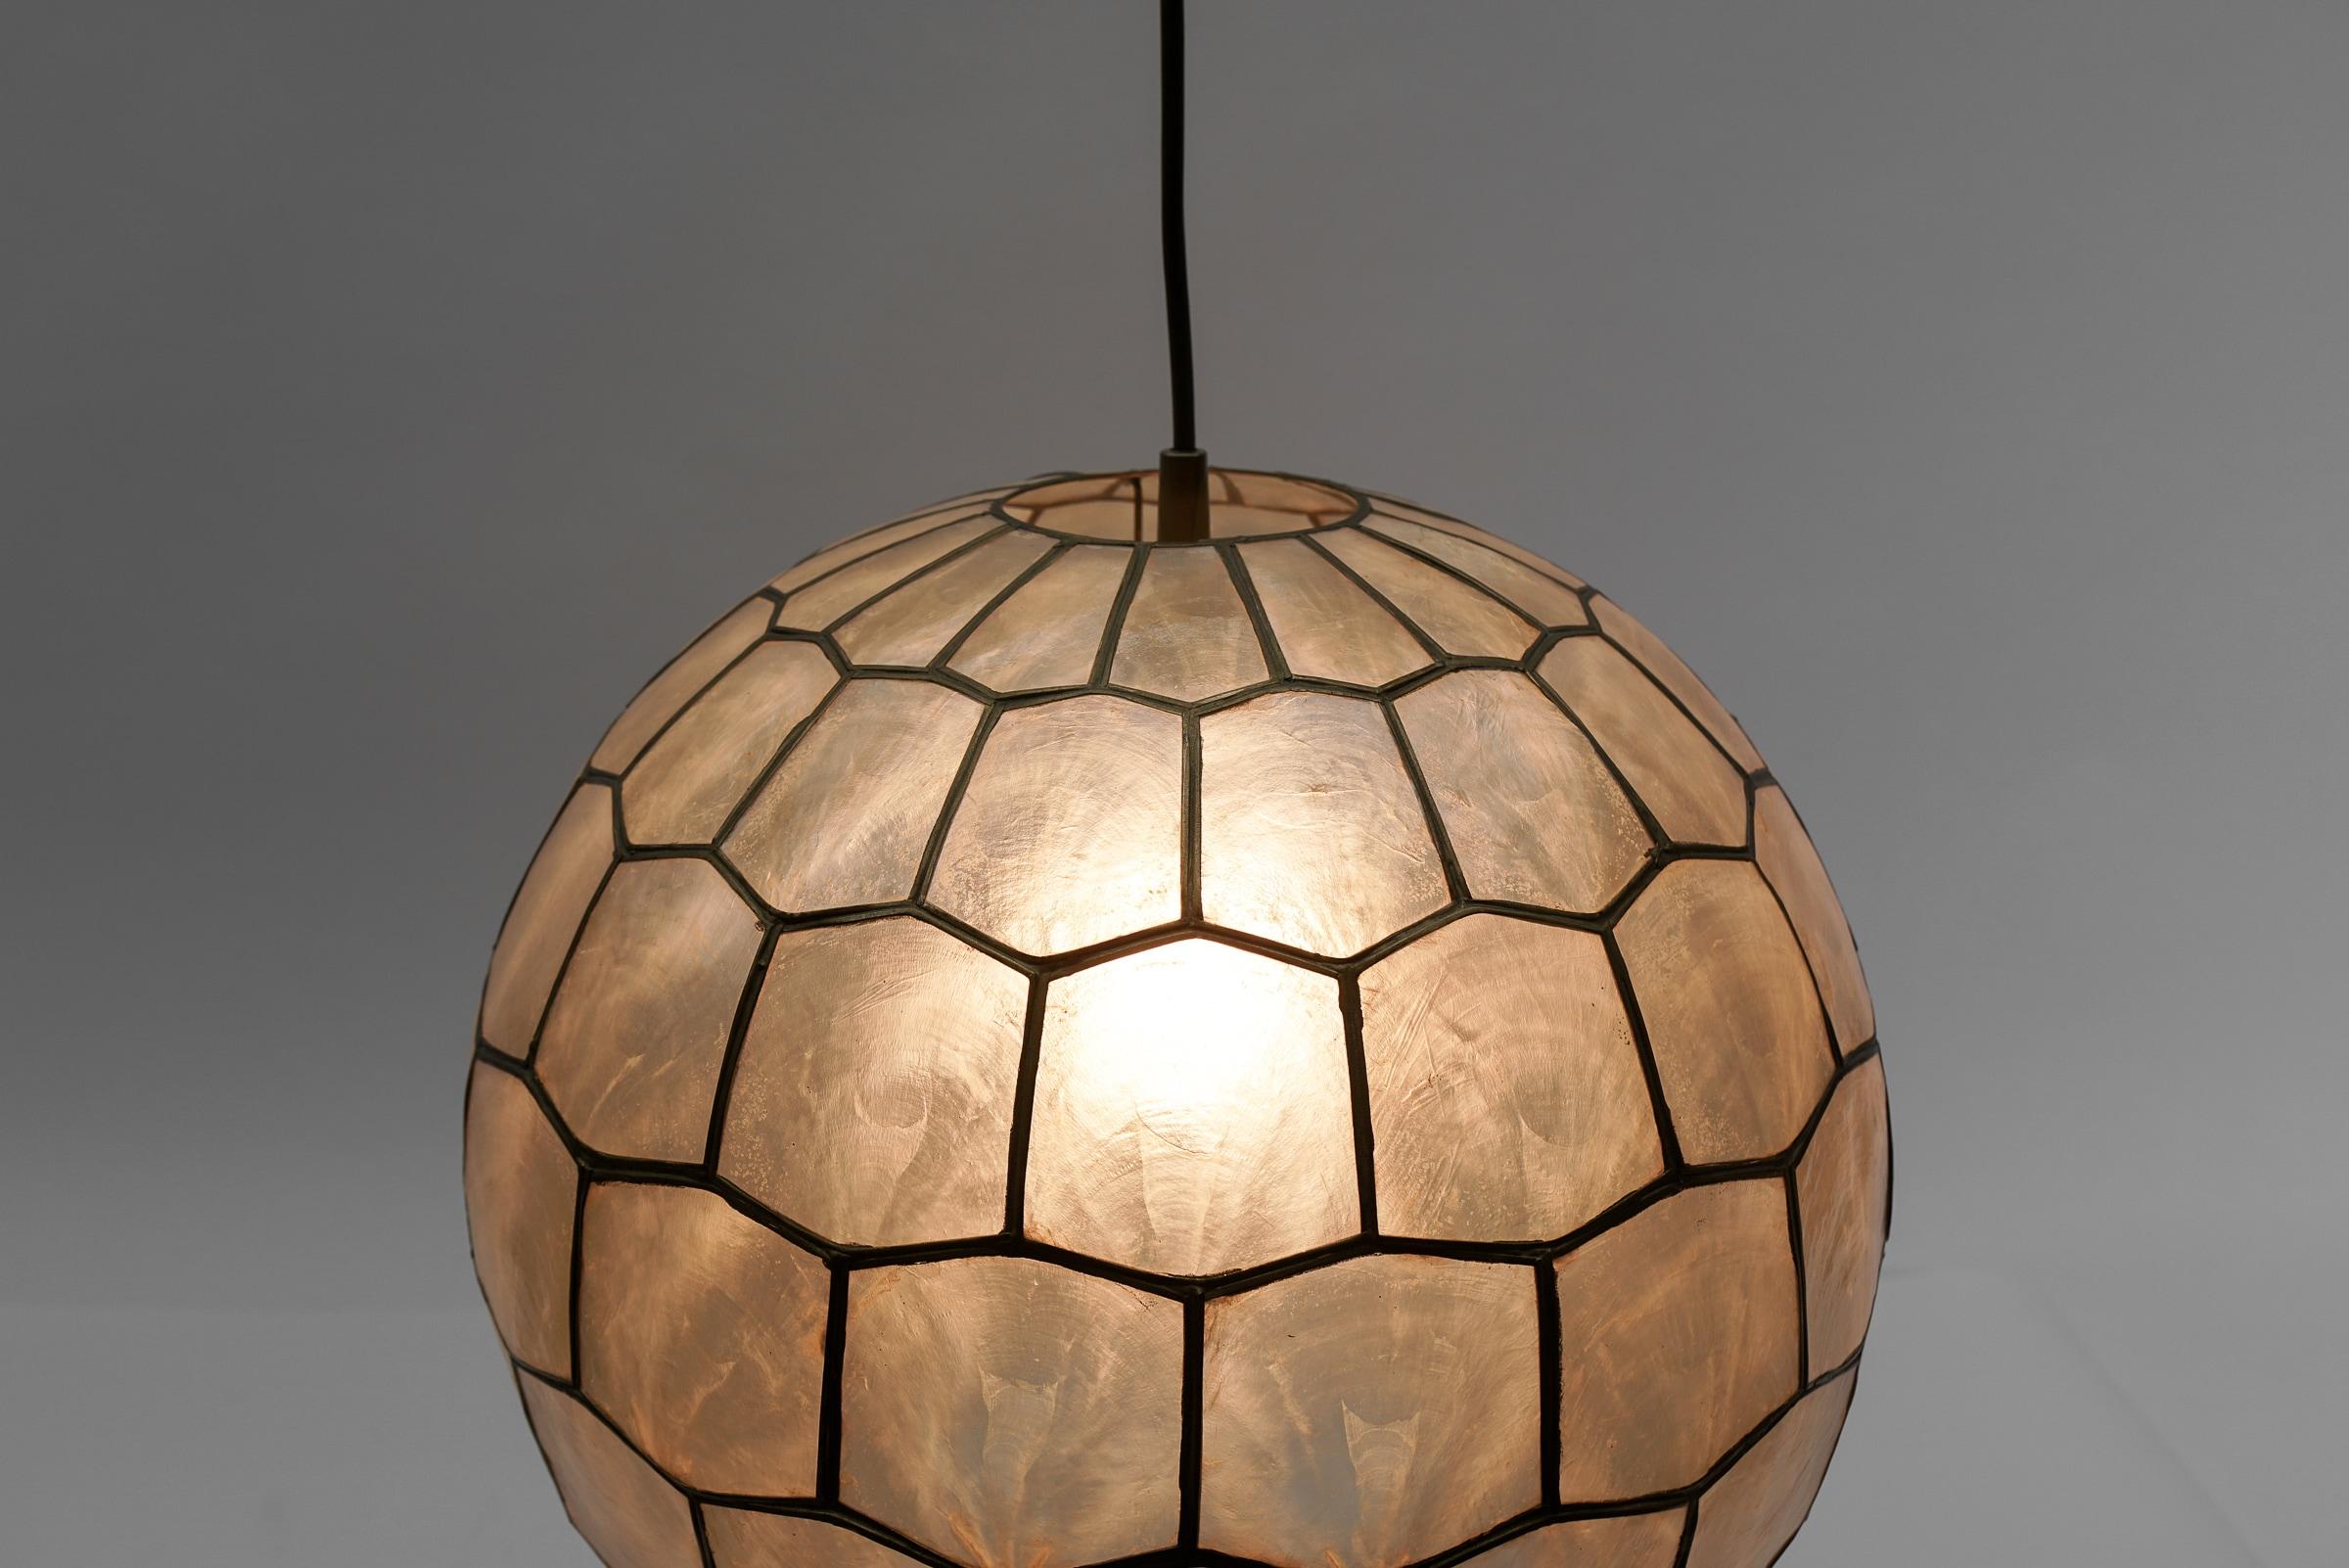 Lovely Mother-of-Pearl Ceiling Ball Lamp, 1960s For Sale 3